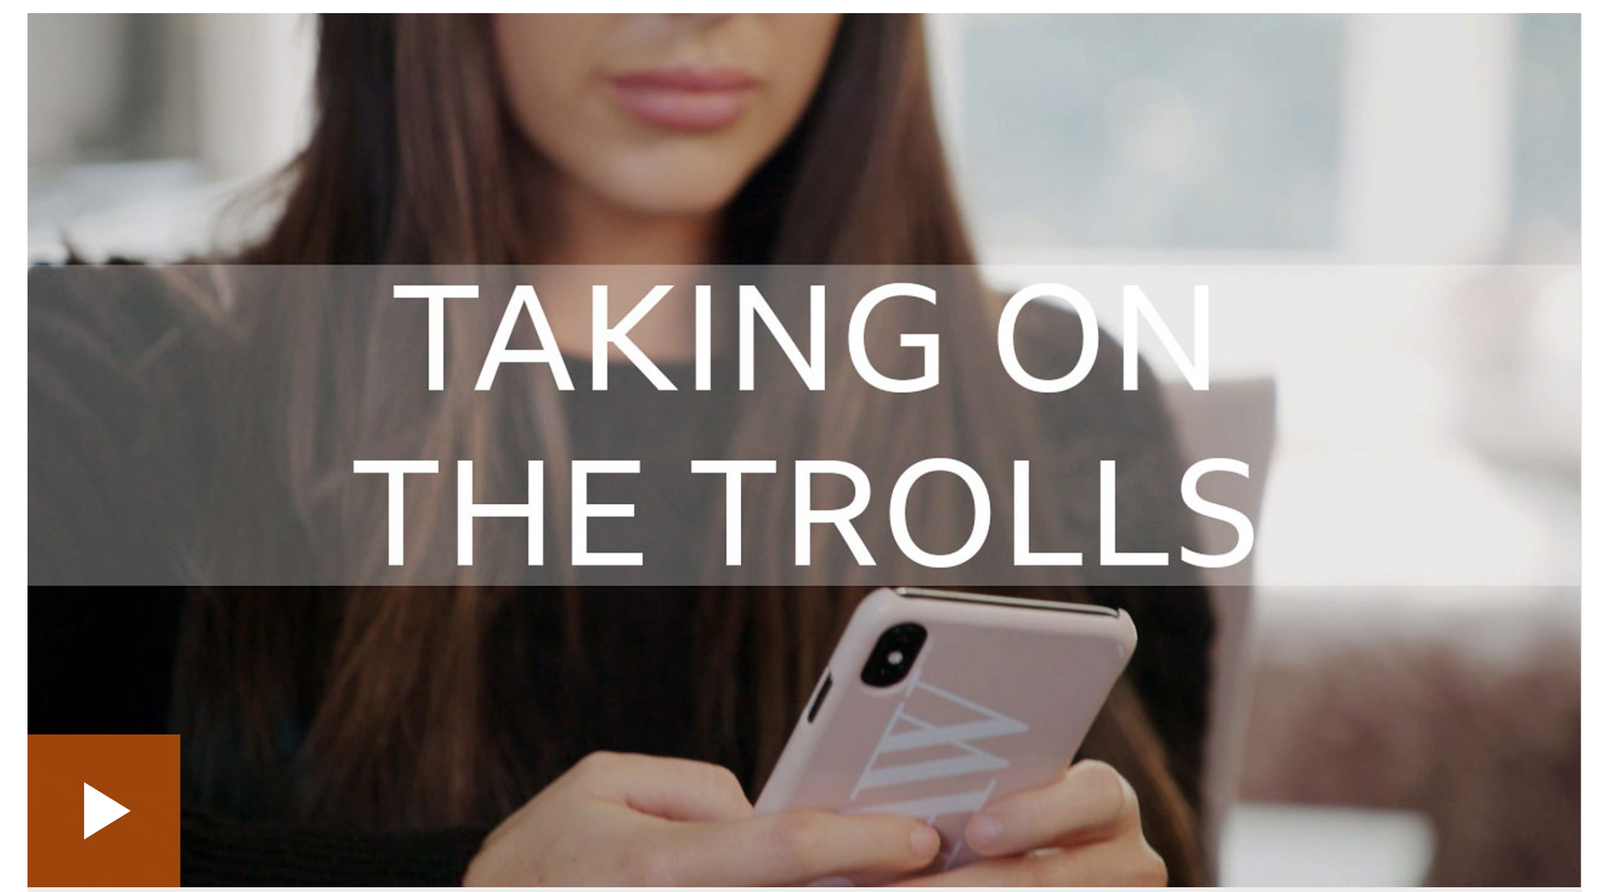 How to Deal With Facebook Trolls